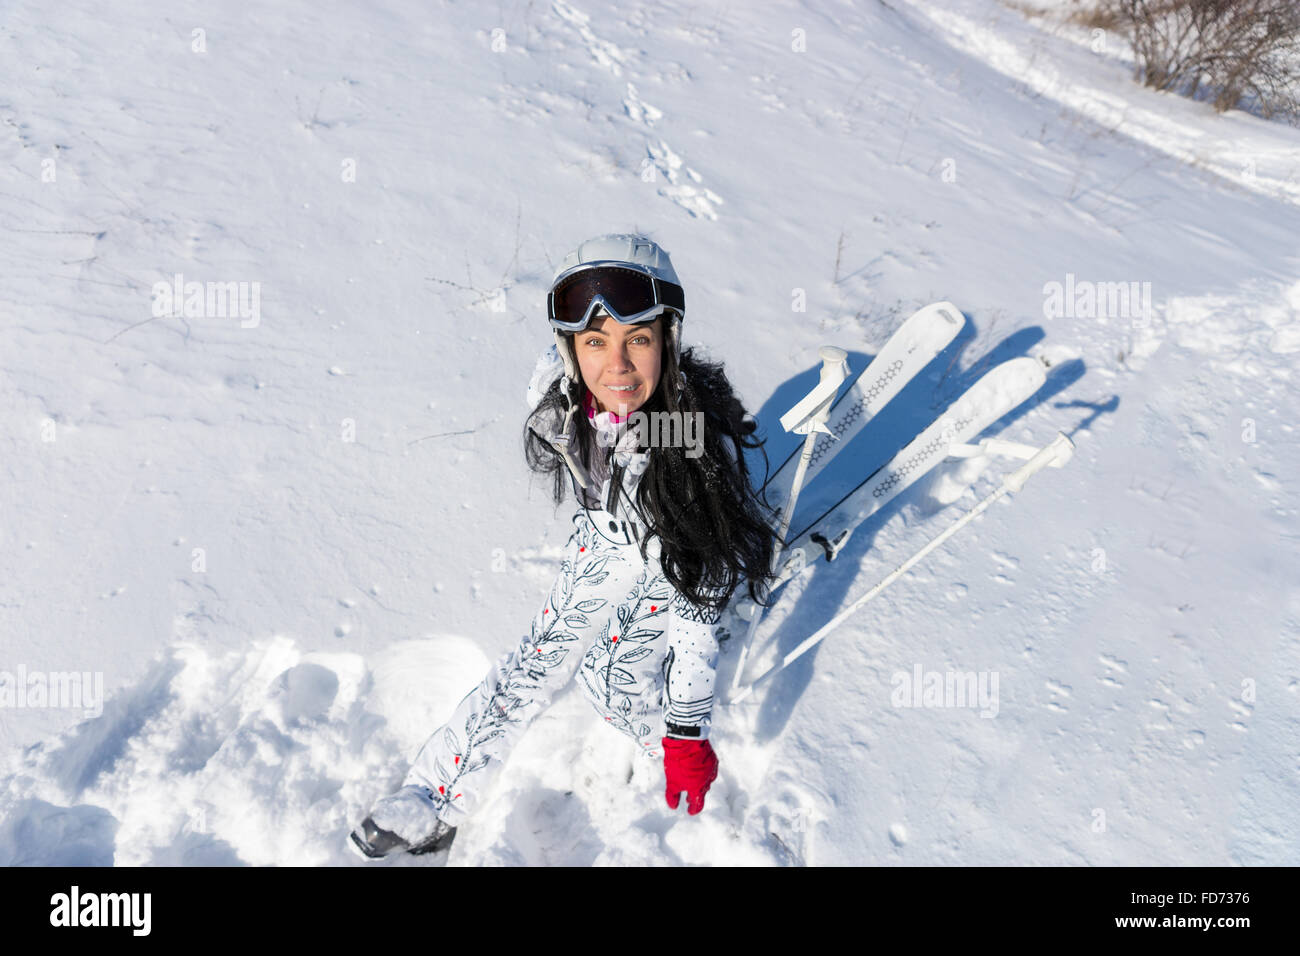 High Angle Full Length View of Young Woman Wearing White Ski Suit and  Helmet Sitting on Snow Covered Mountainside with Skis and Poles on Sunny  Day with Warm Sunshine Stock Photo -